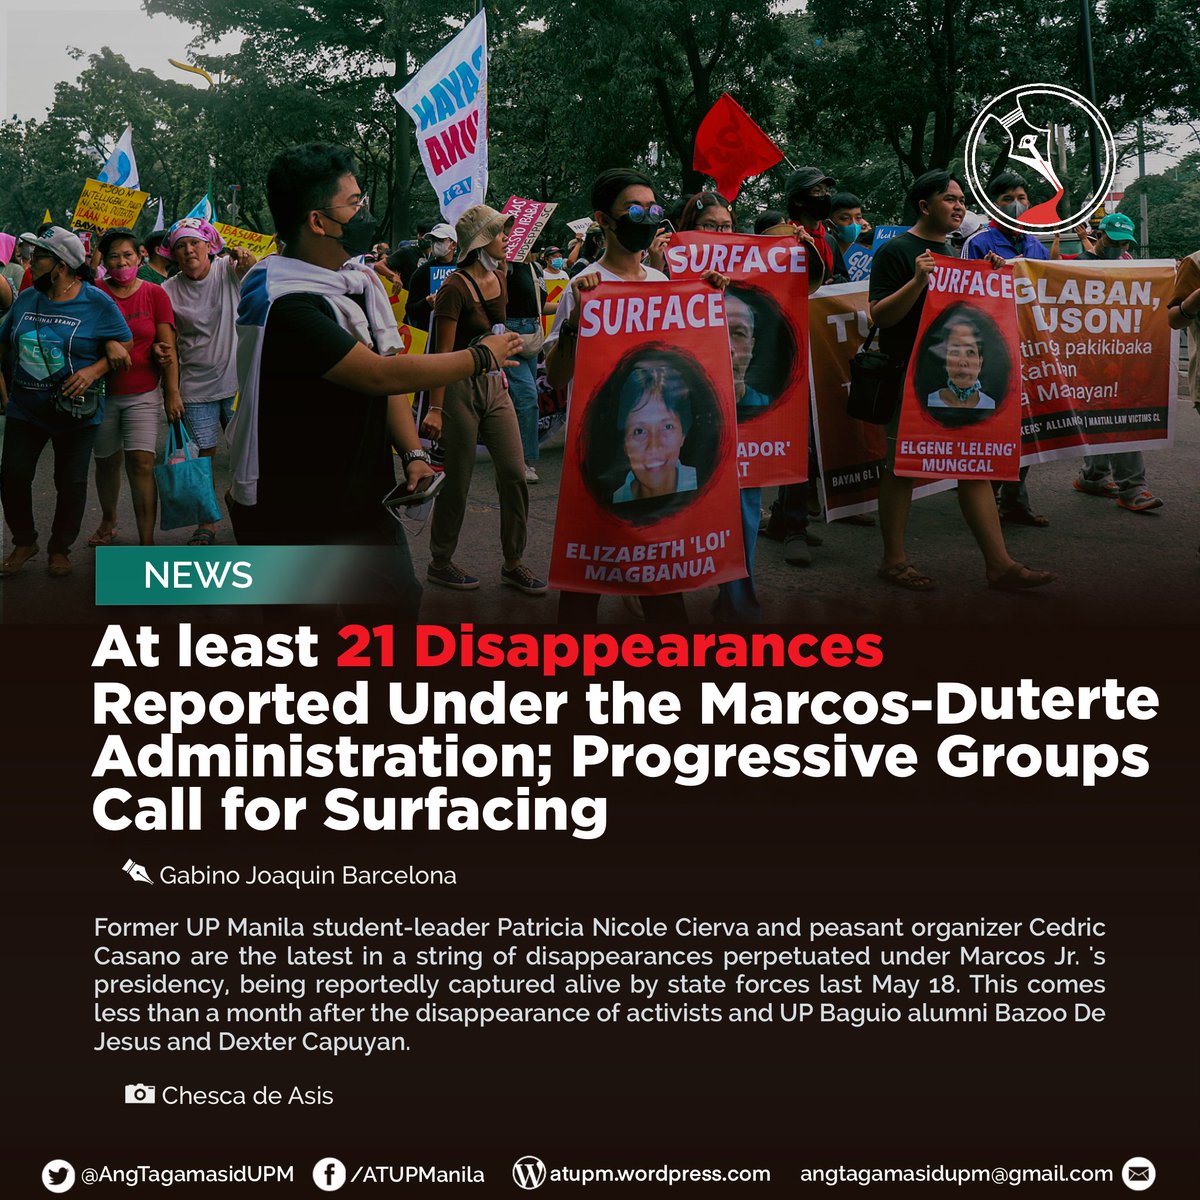 Former UP Manila student-leader Patricia Cierva and peasant organizer Cedric Casano are the latest in a string of disappearances under Marcos Jr.'s presidency, being reportedly abducted by state forces last May 18.  

READ: bit.ly/21Disappeared

#SurfaceCedrickAndPatricia